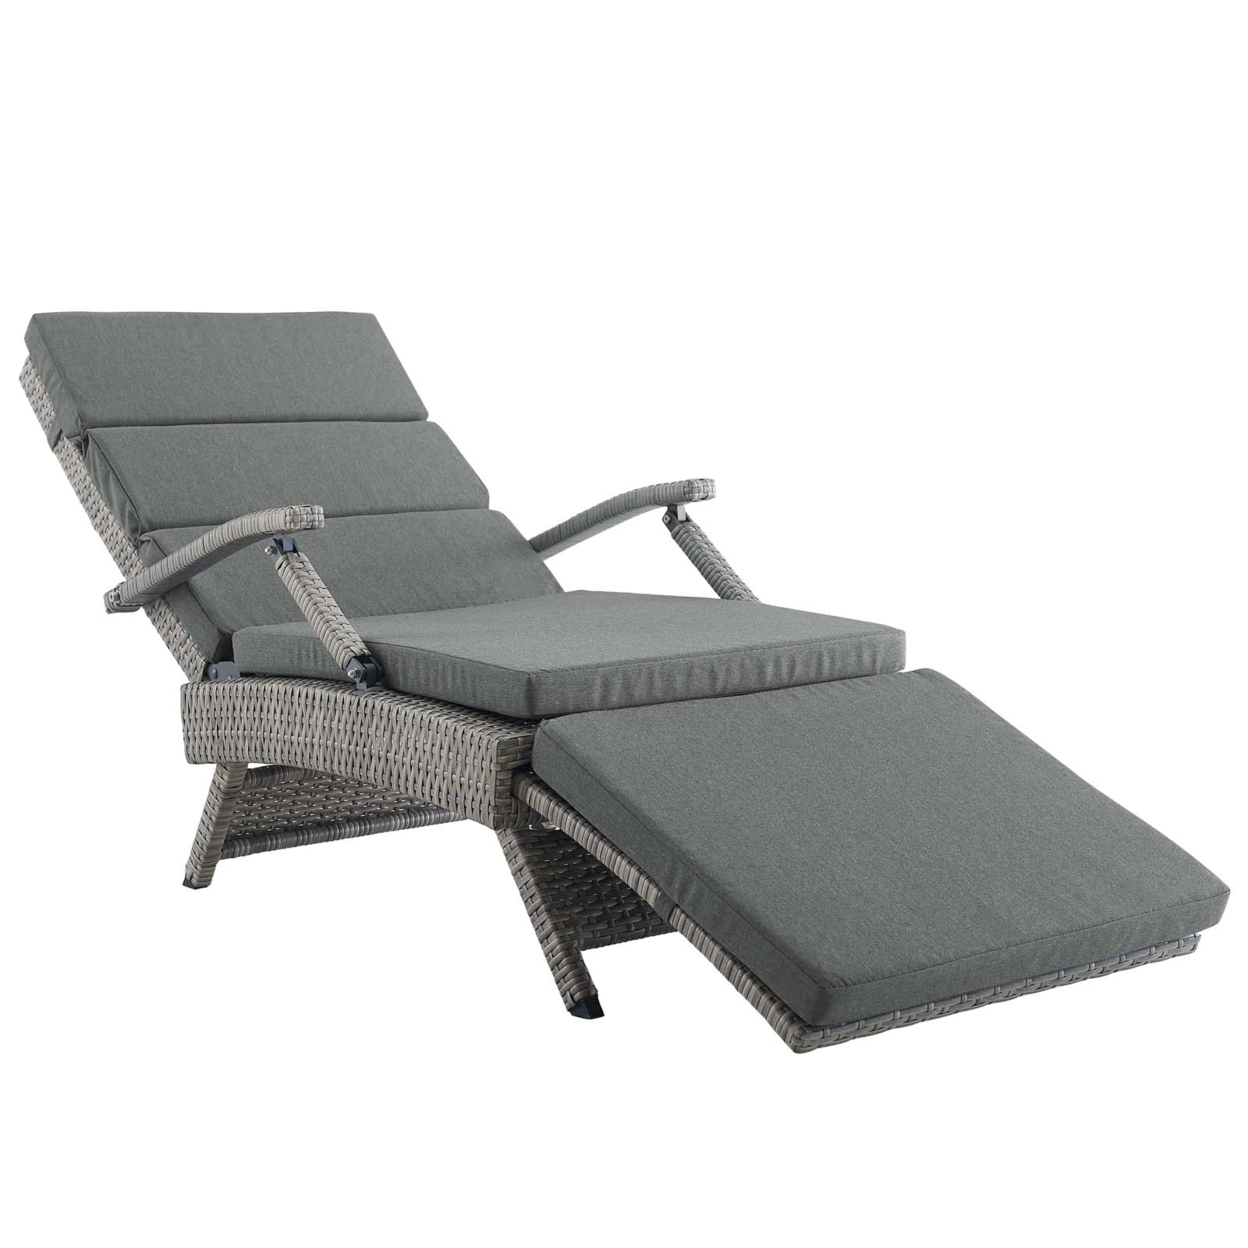 Envisage Chaise Outdoor Patio Wicker Rattan Lounge Chair,Light Gray Charcoal